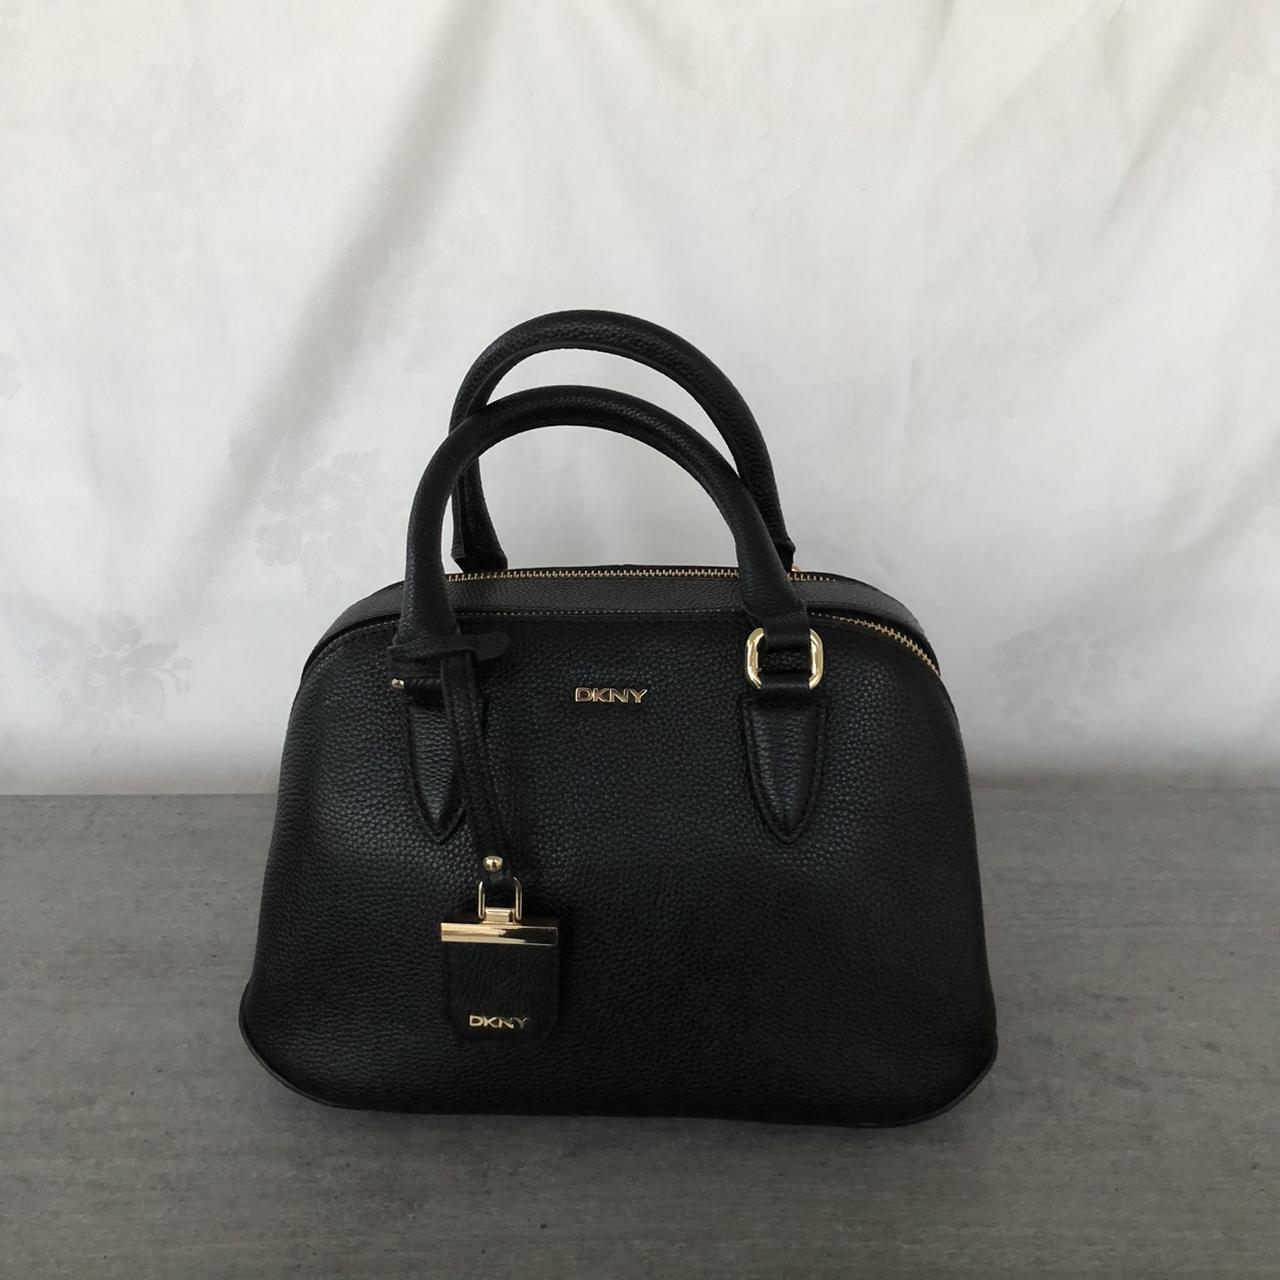 Dkny saffiano leather bag with gold hardware Bought - Depop